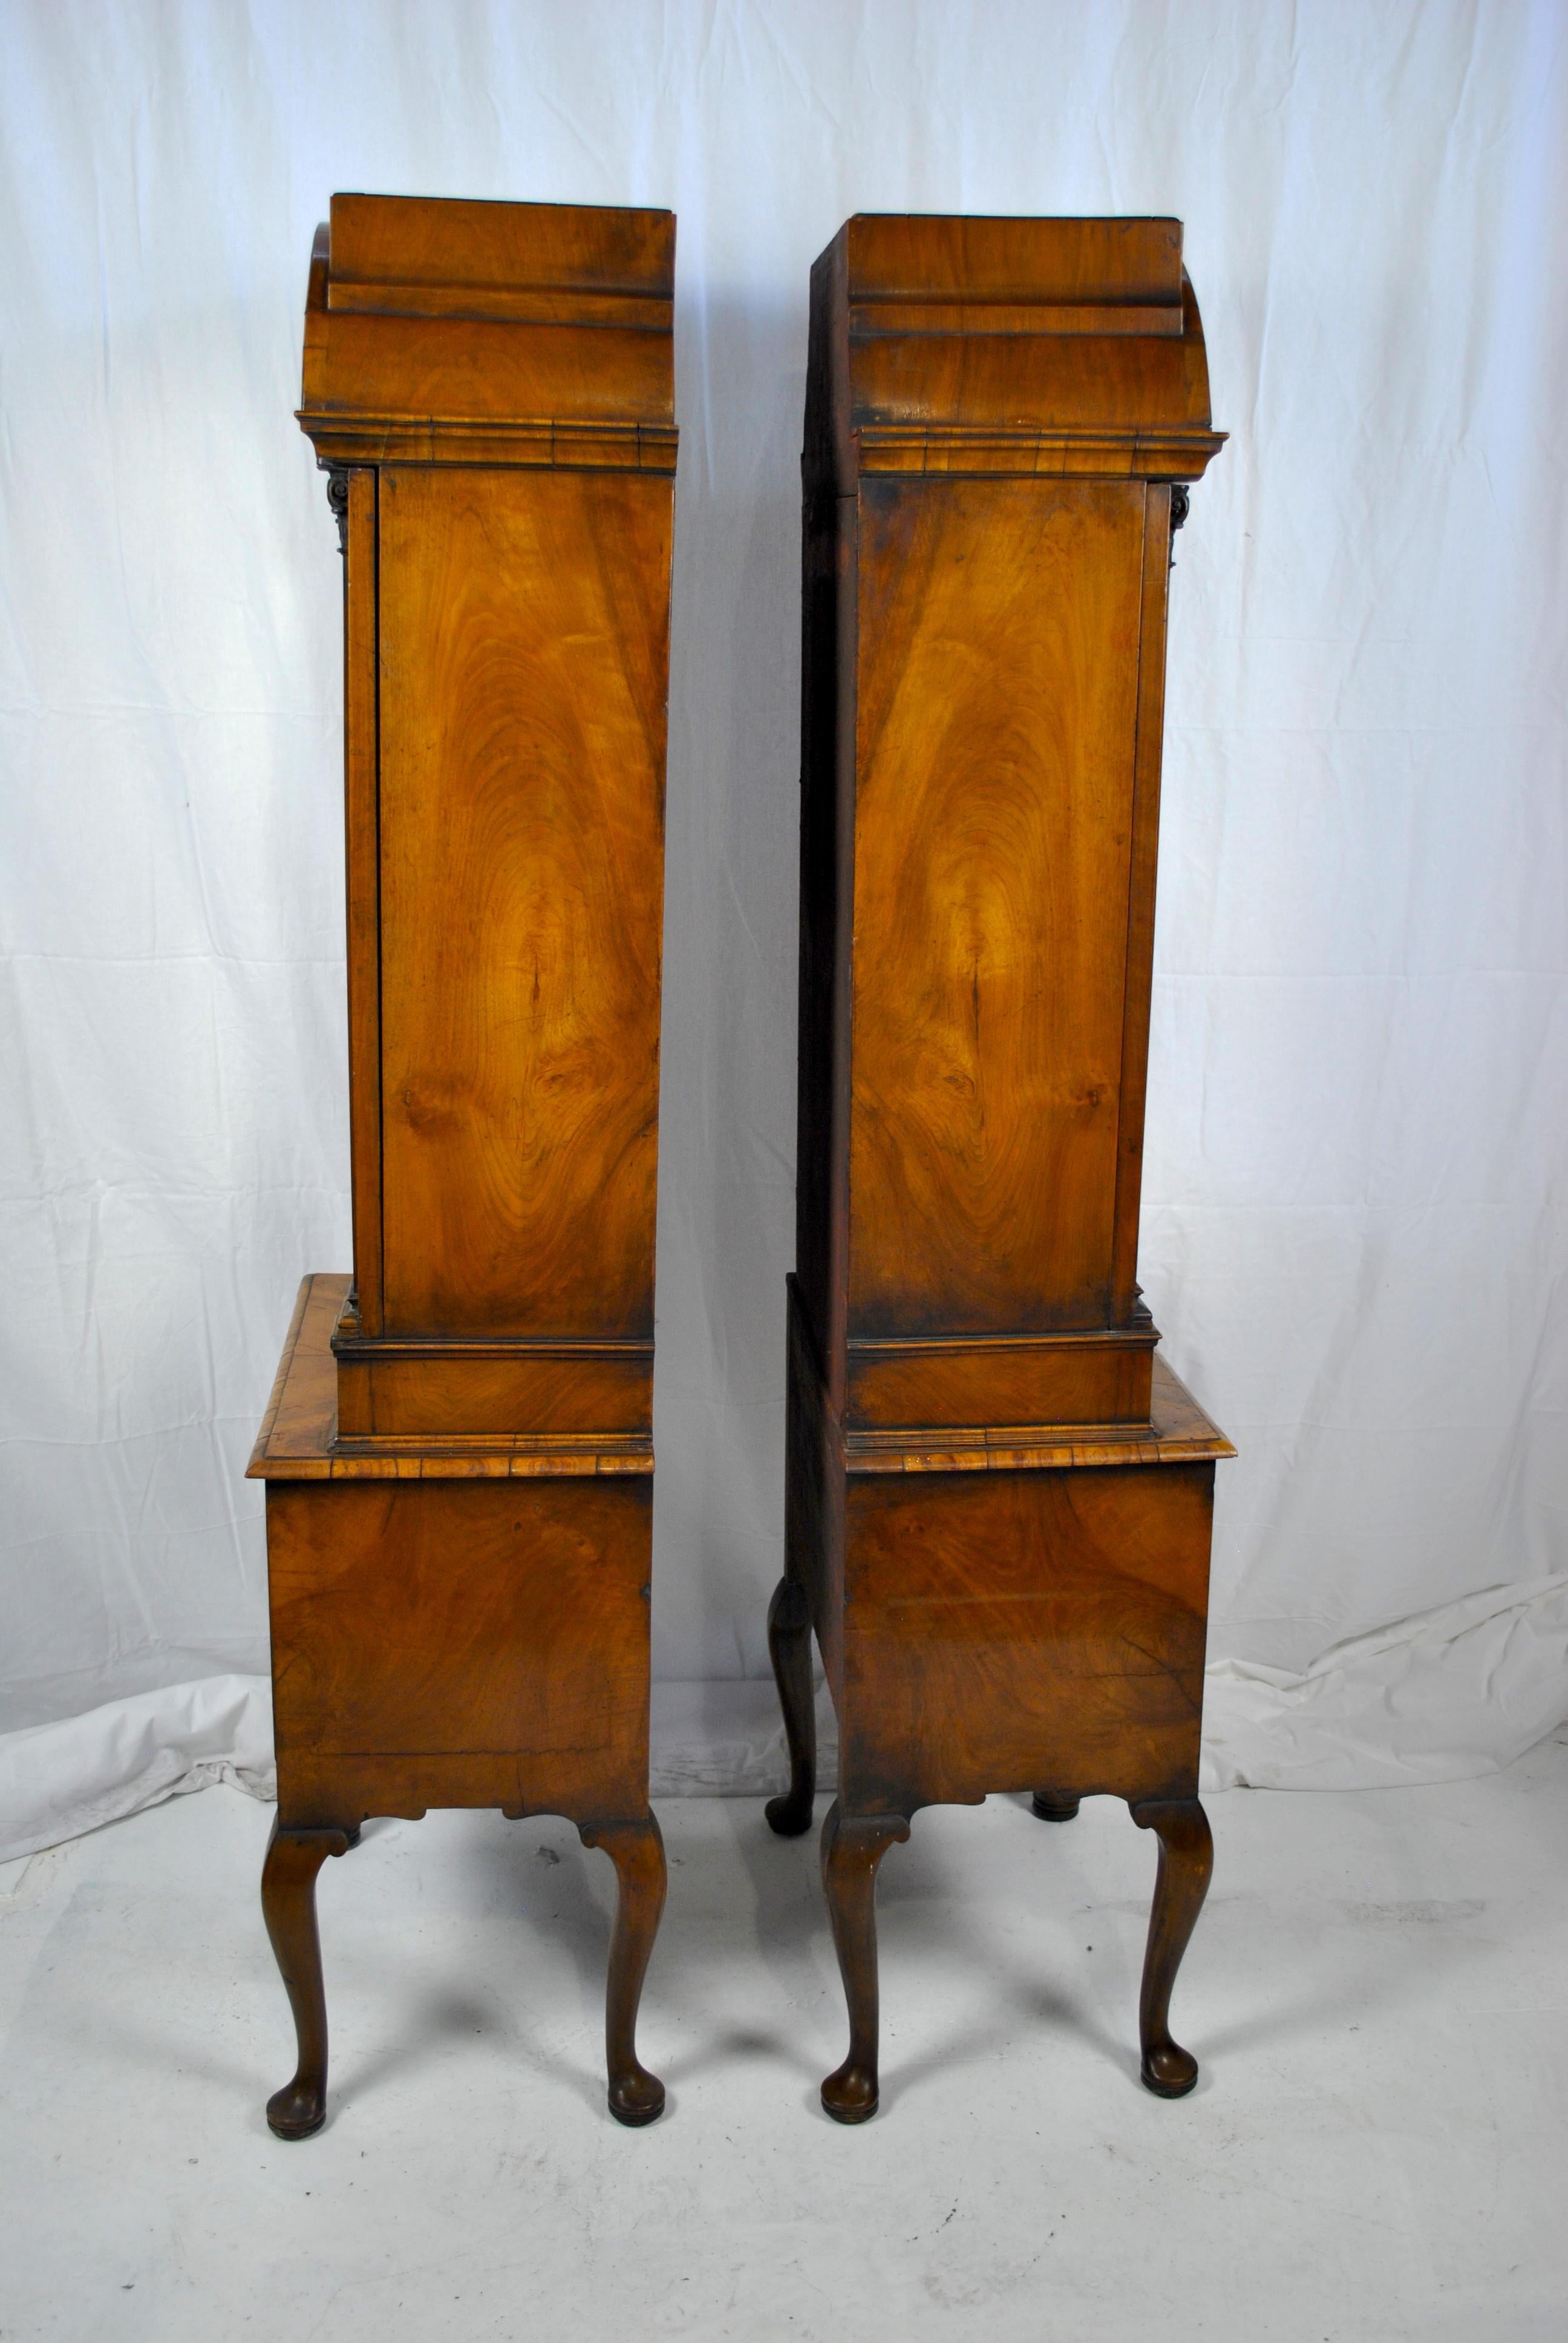 Joinery Pair of 18th Century Queen Anne English Cabinets, 1712 For Sale